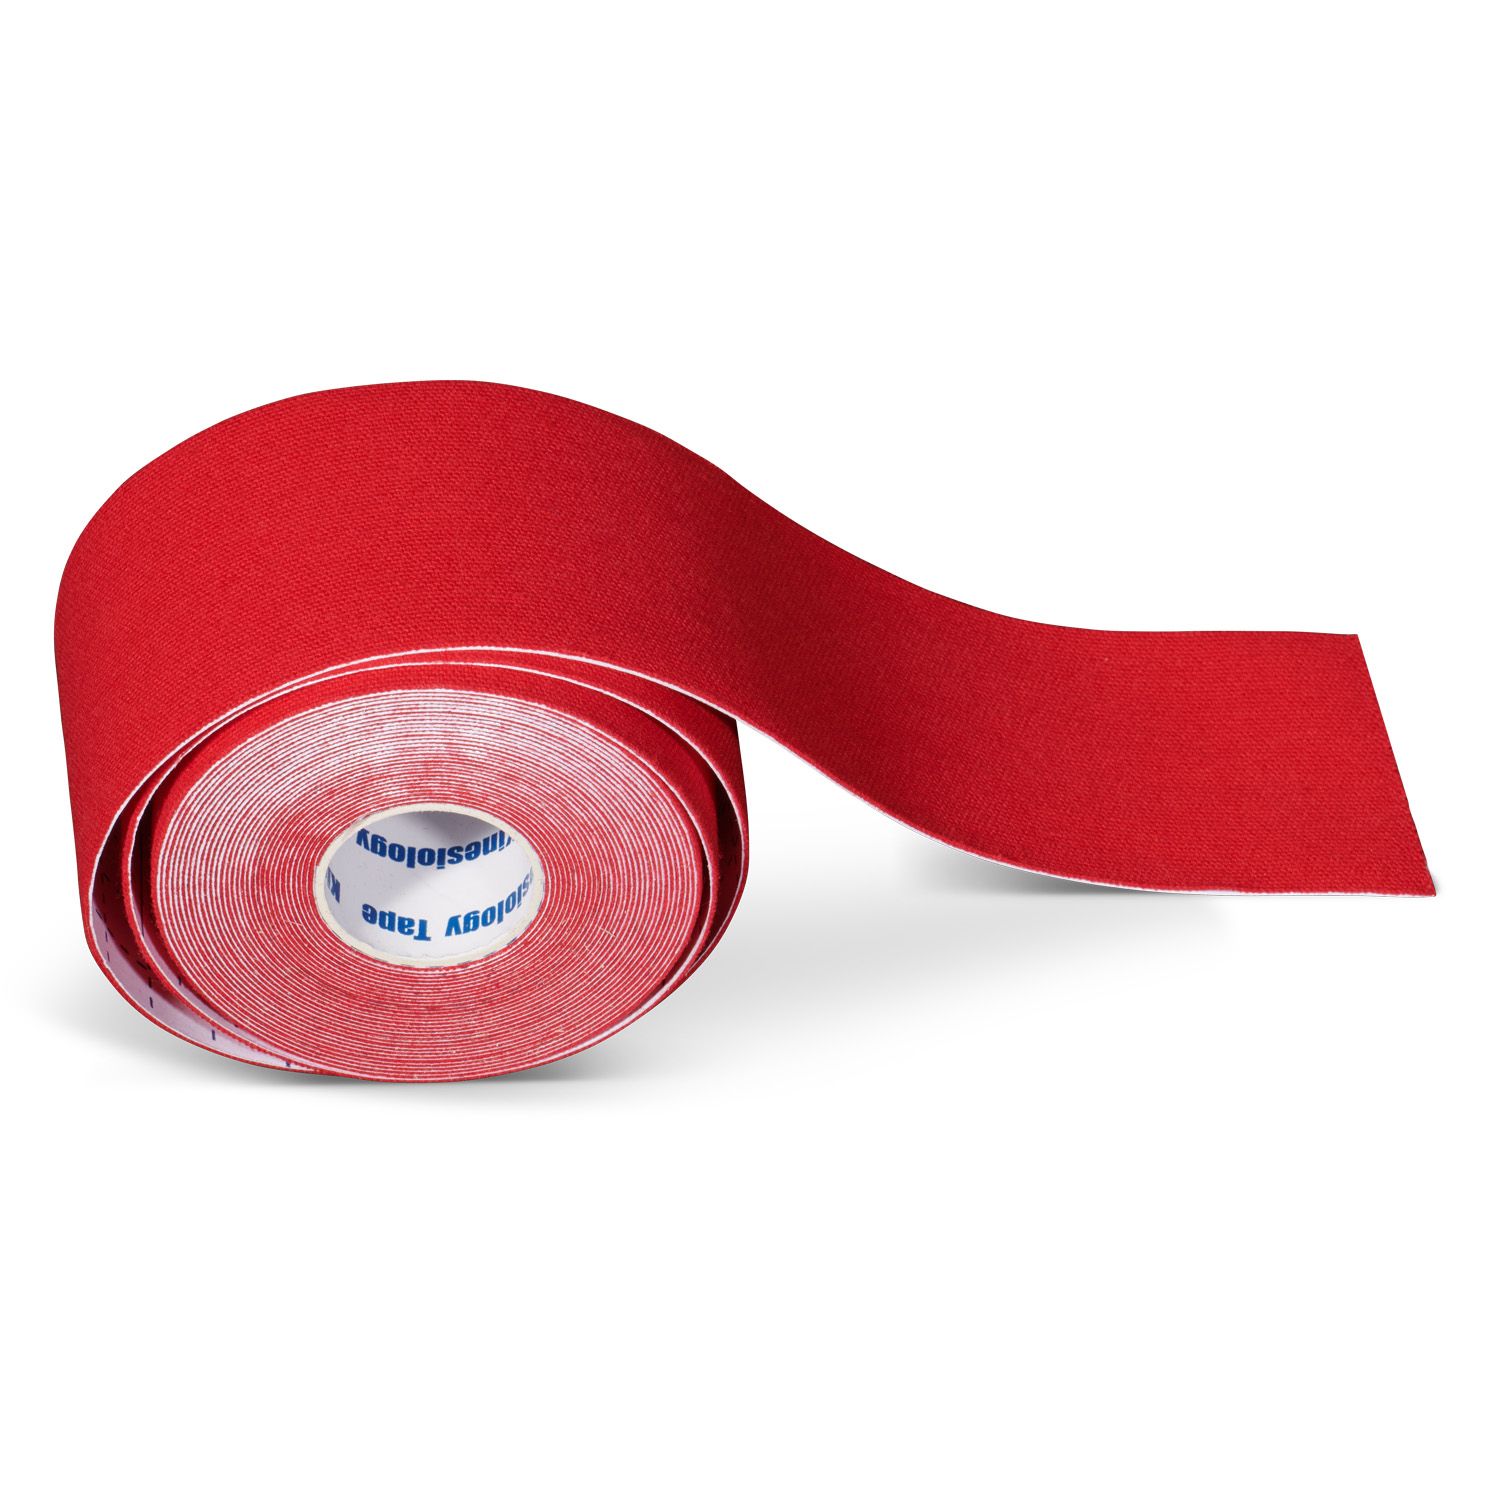 Kinesiology tape 12 rolls plus 3 rolls for free red